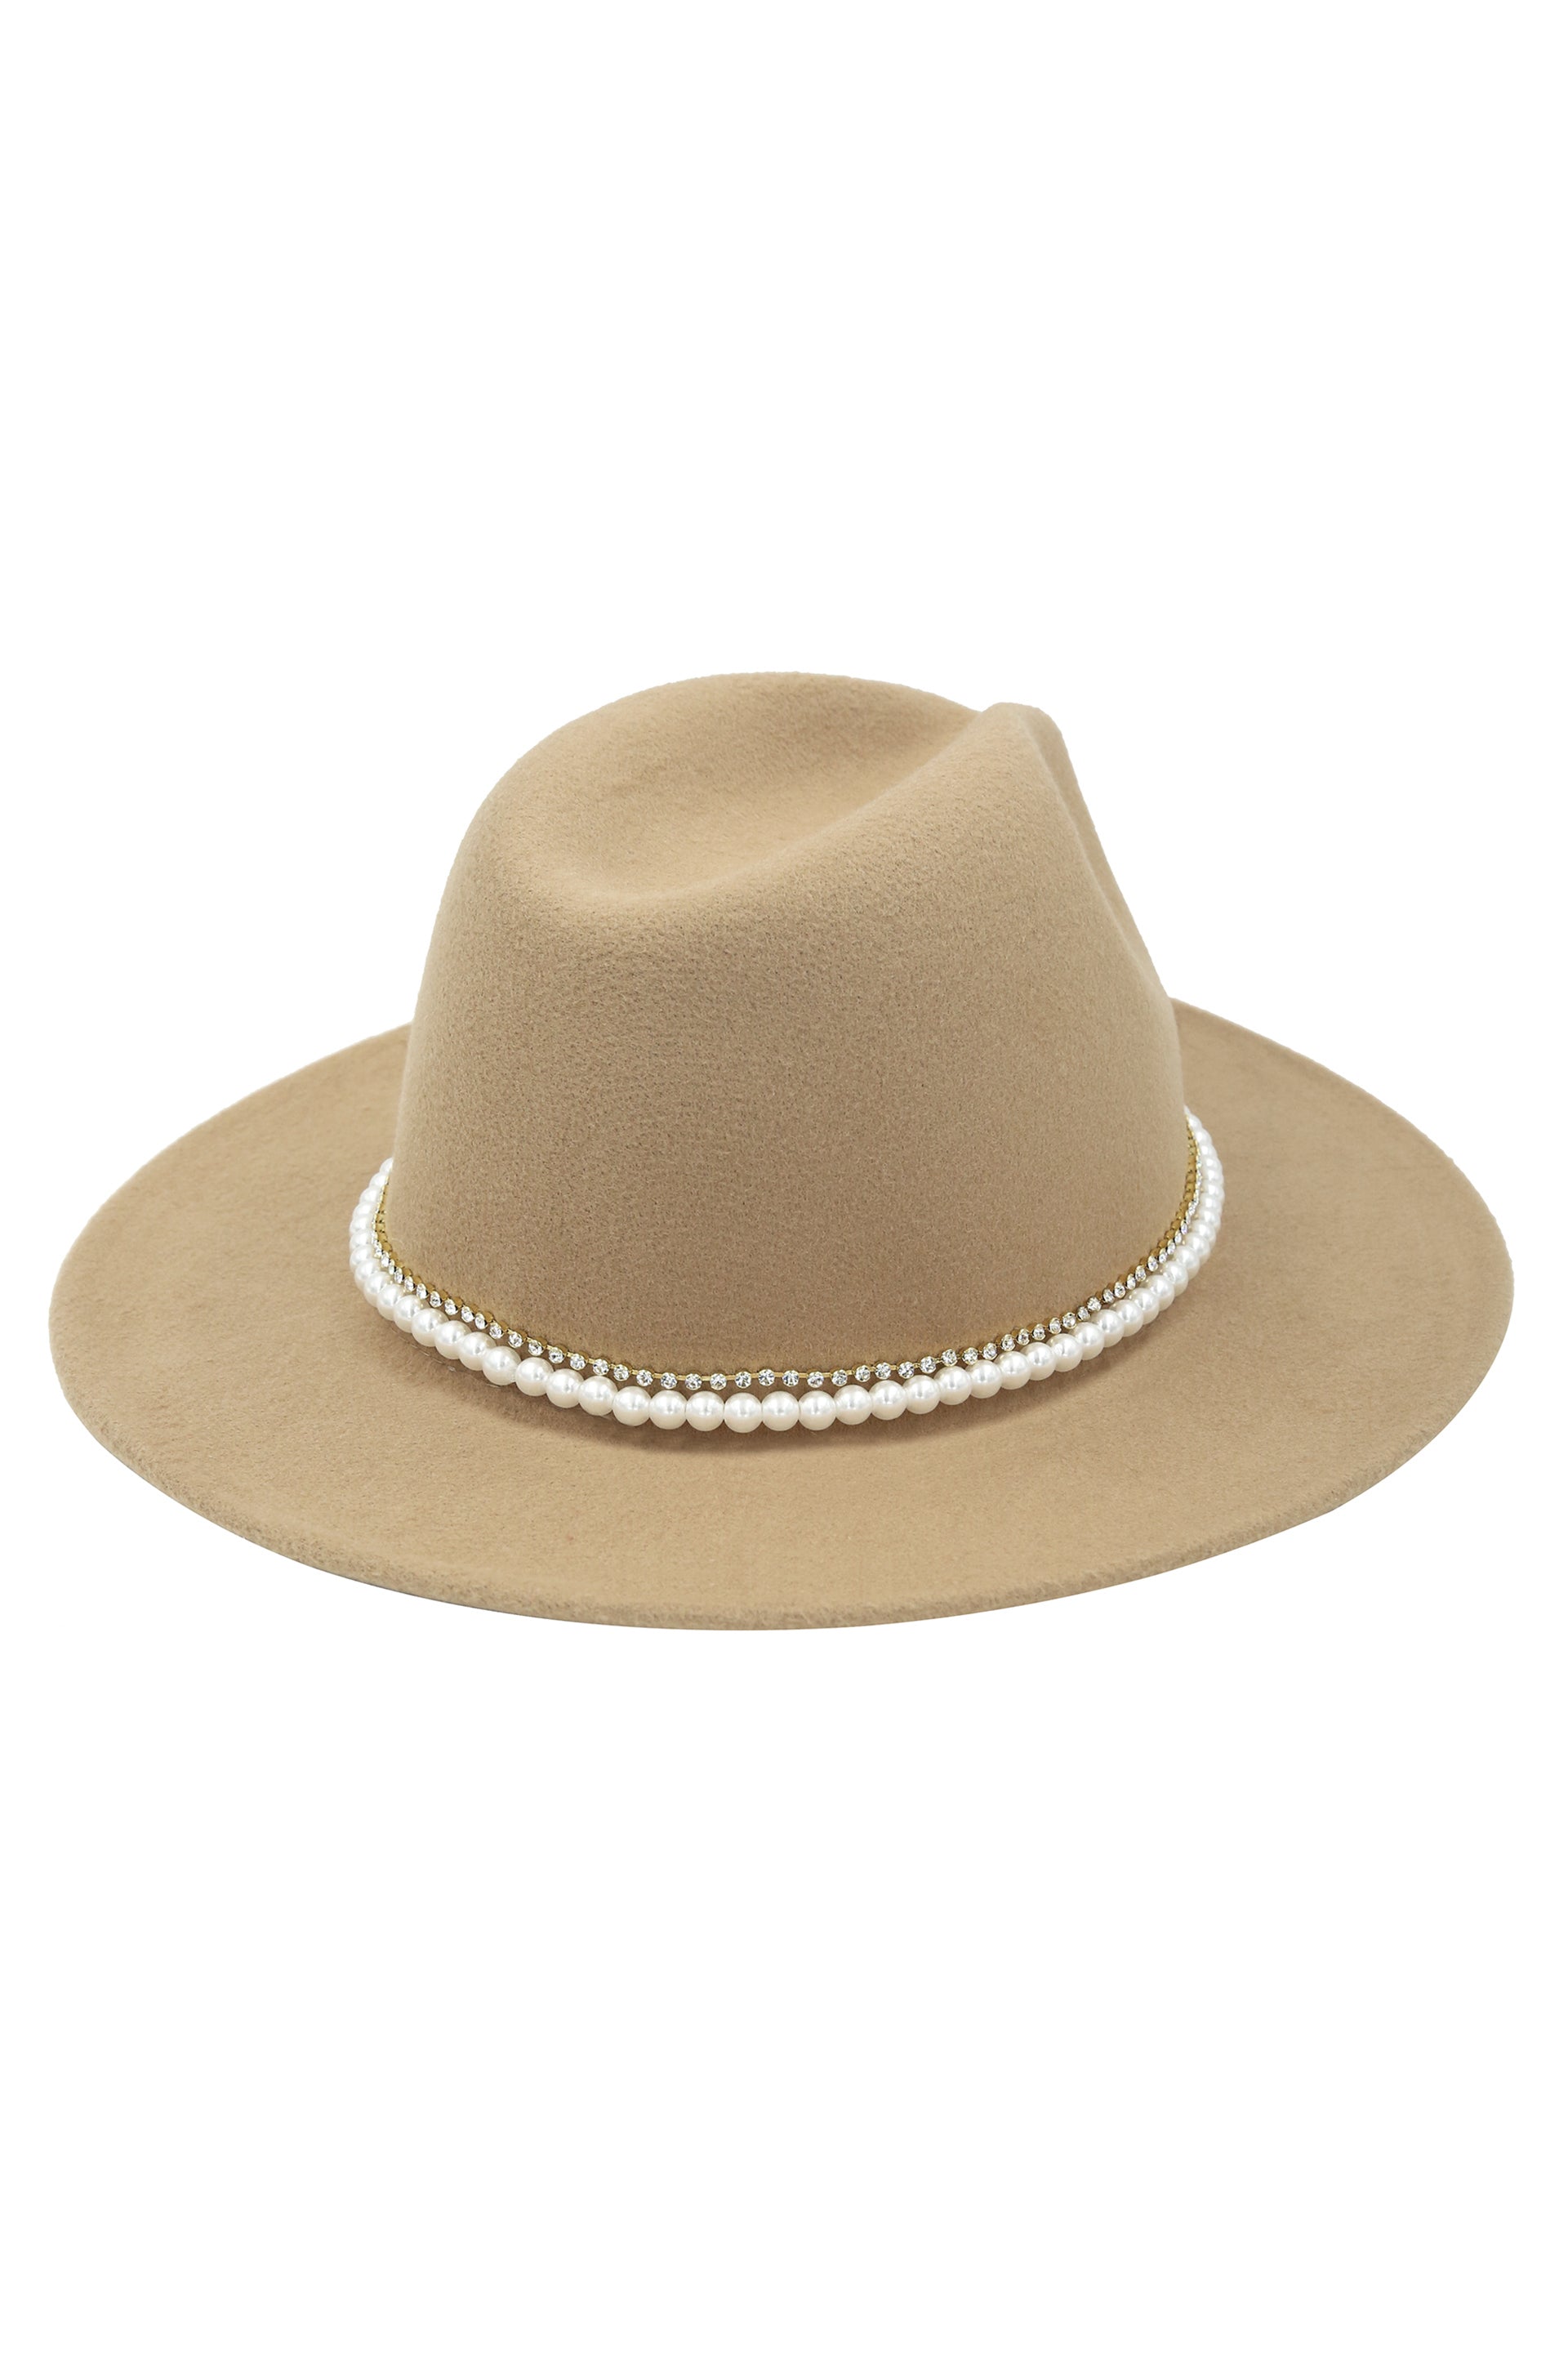 With the Band Hat in Tan with Pearls on white background  